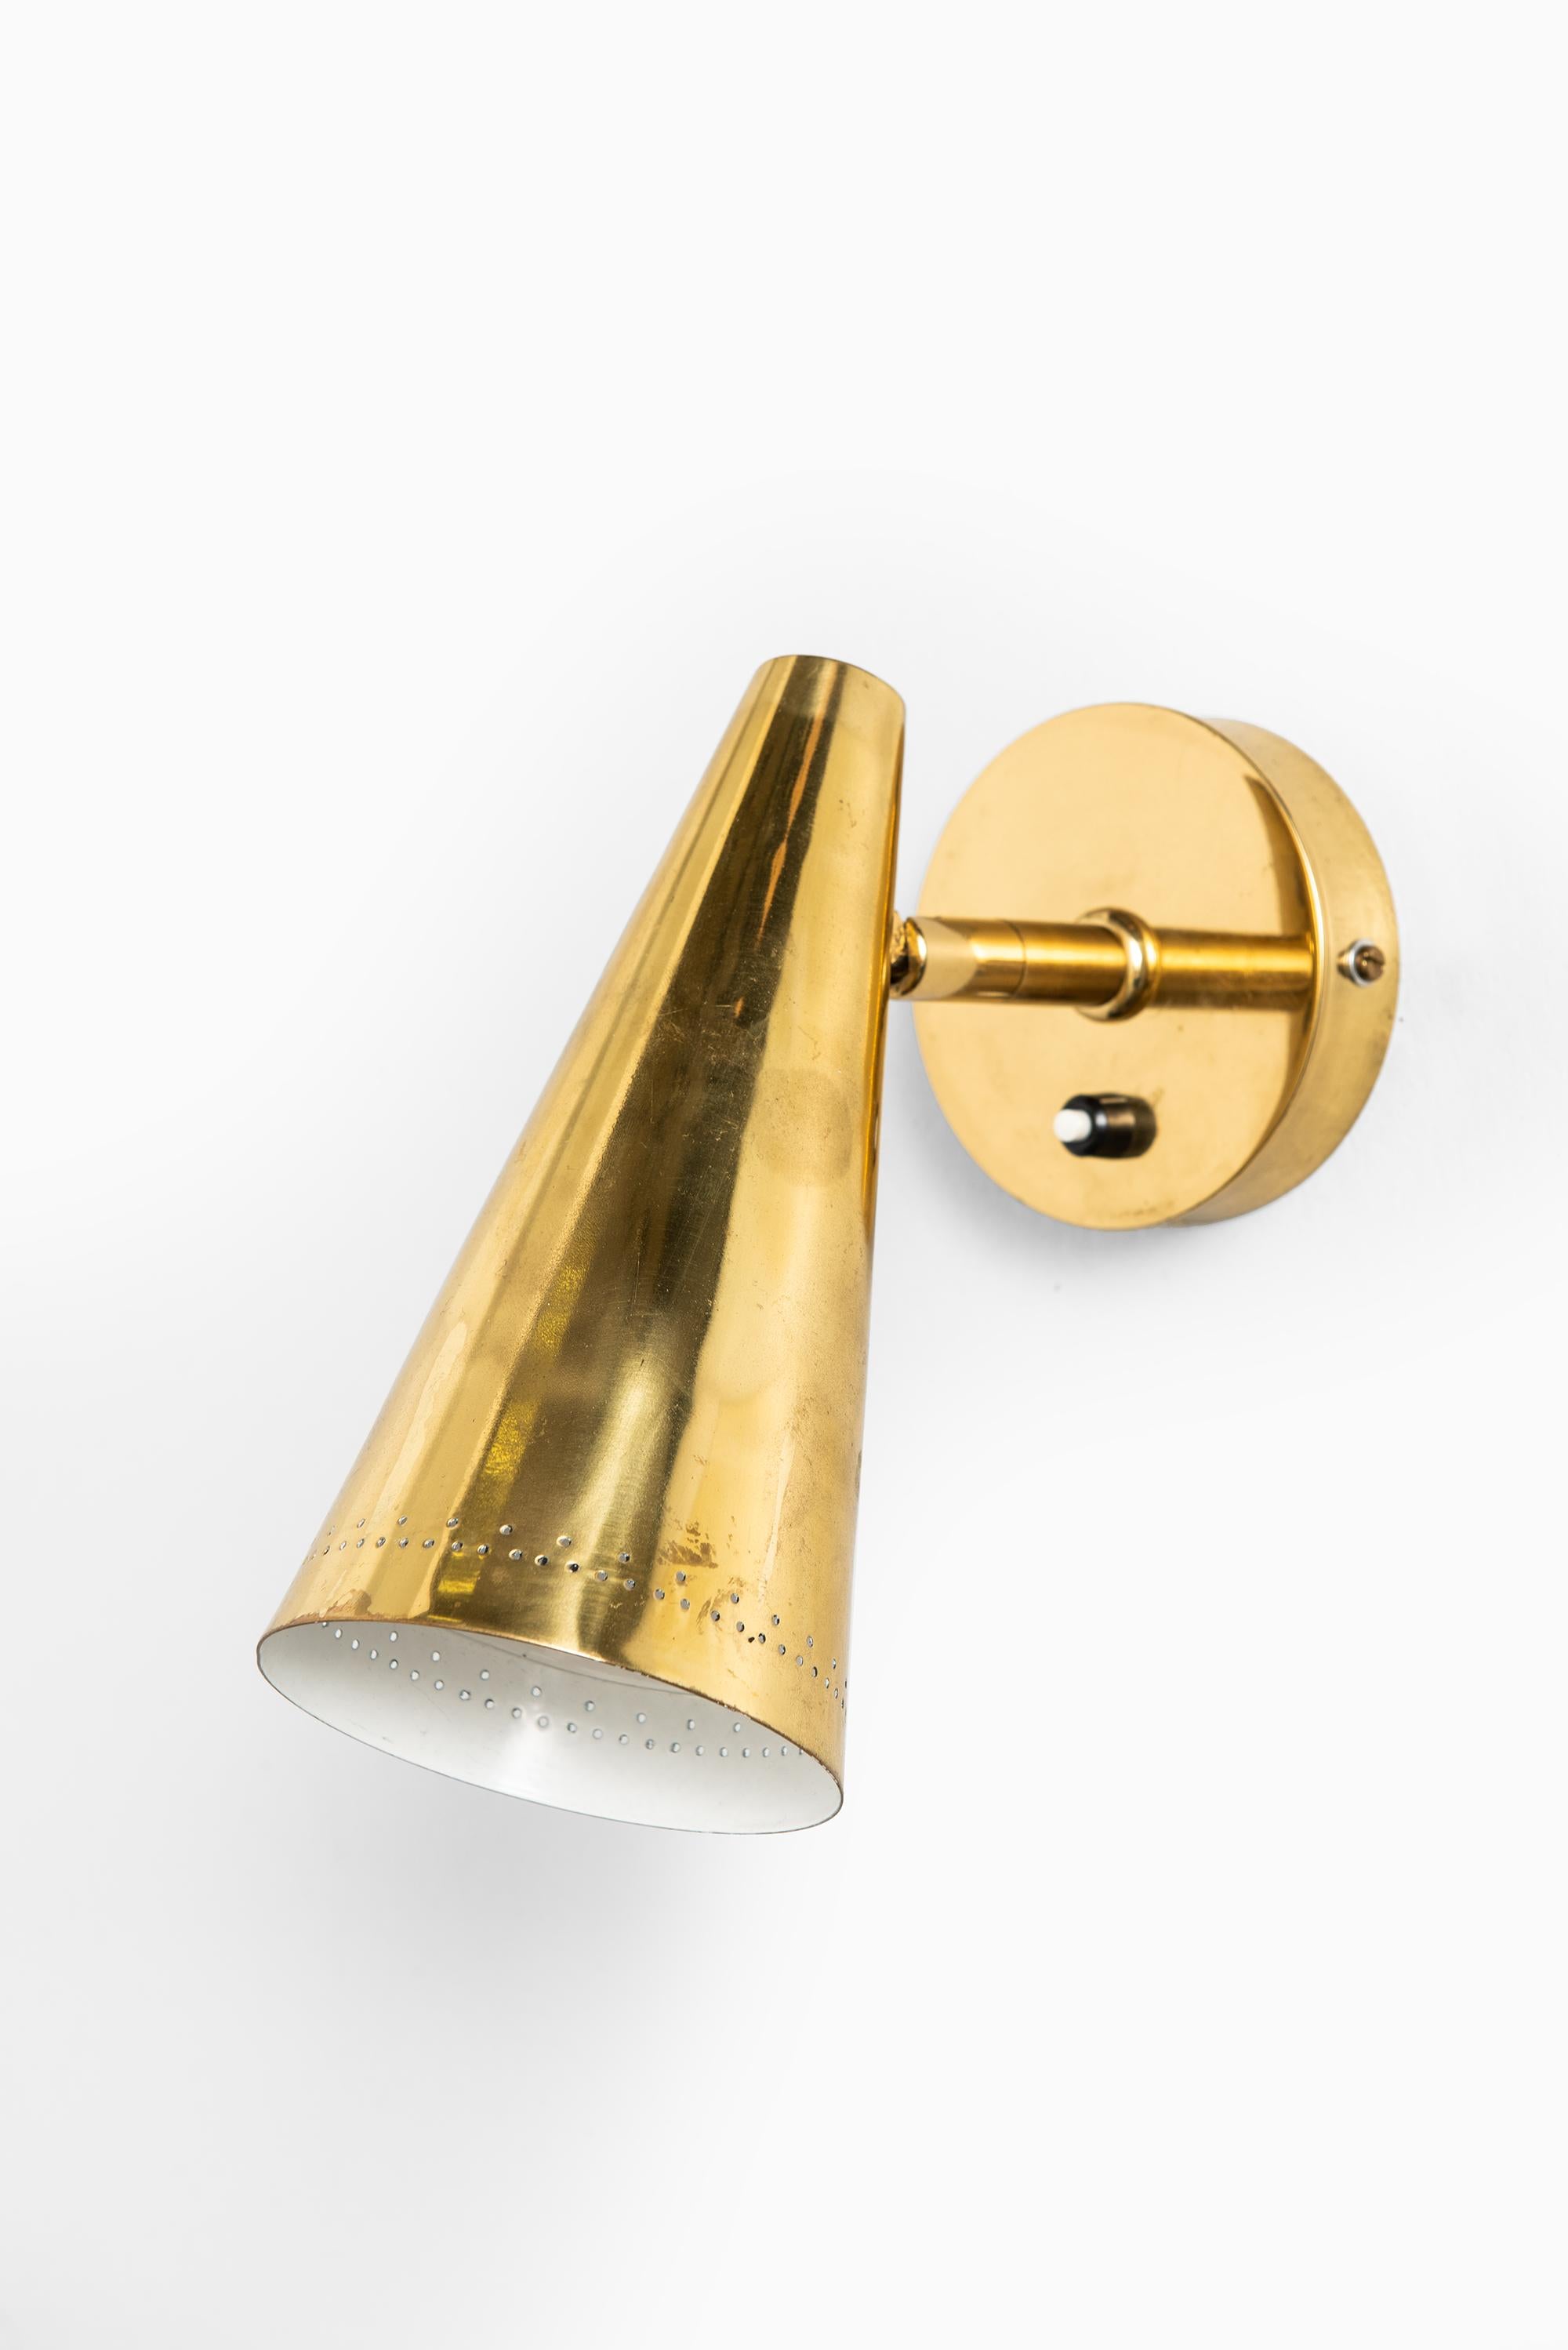 Scandinavian Modern Large Quantity Wall Lamps in Brass Attributed to Lisa Johansson-Pape